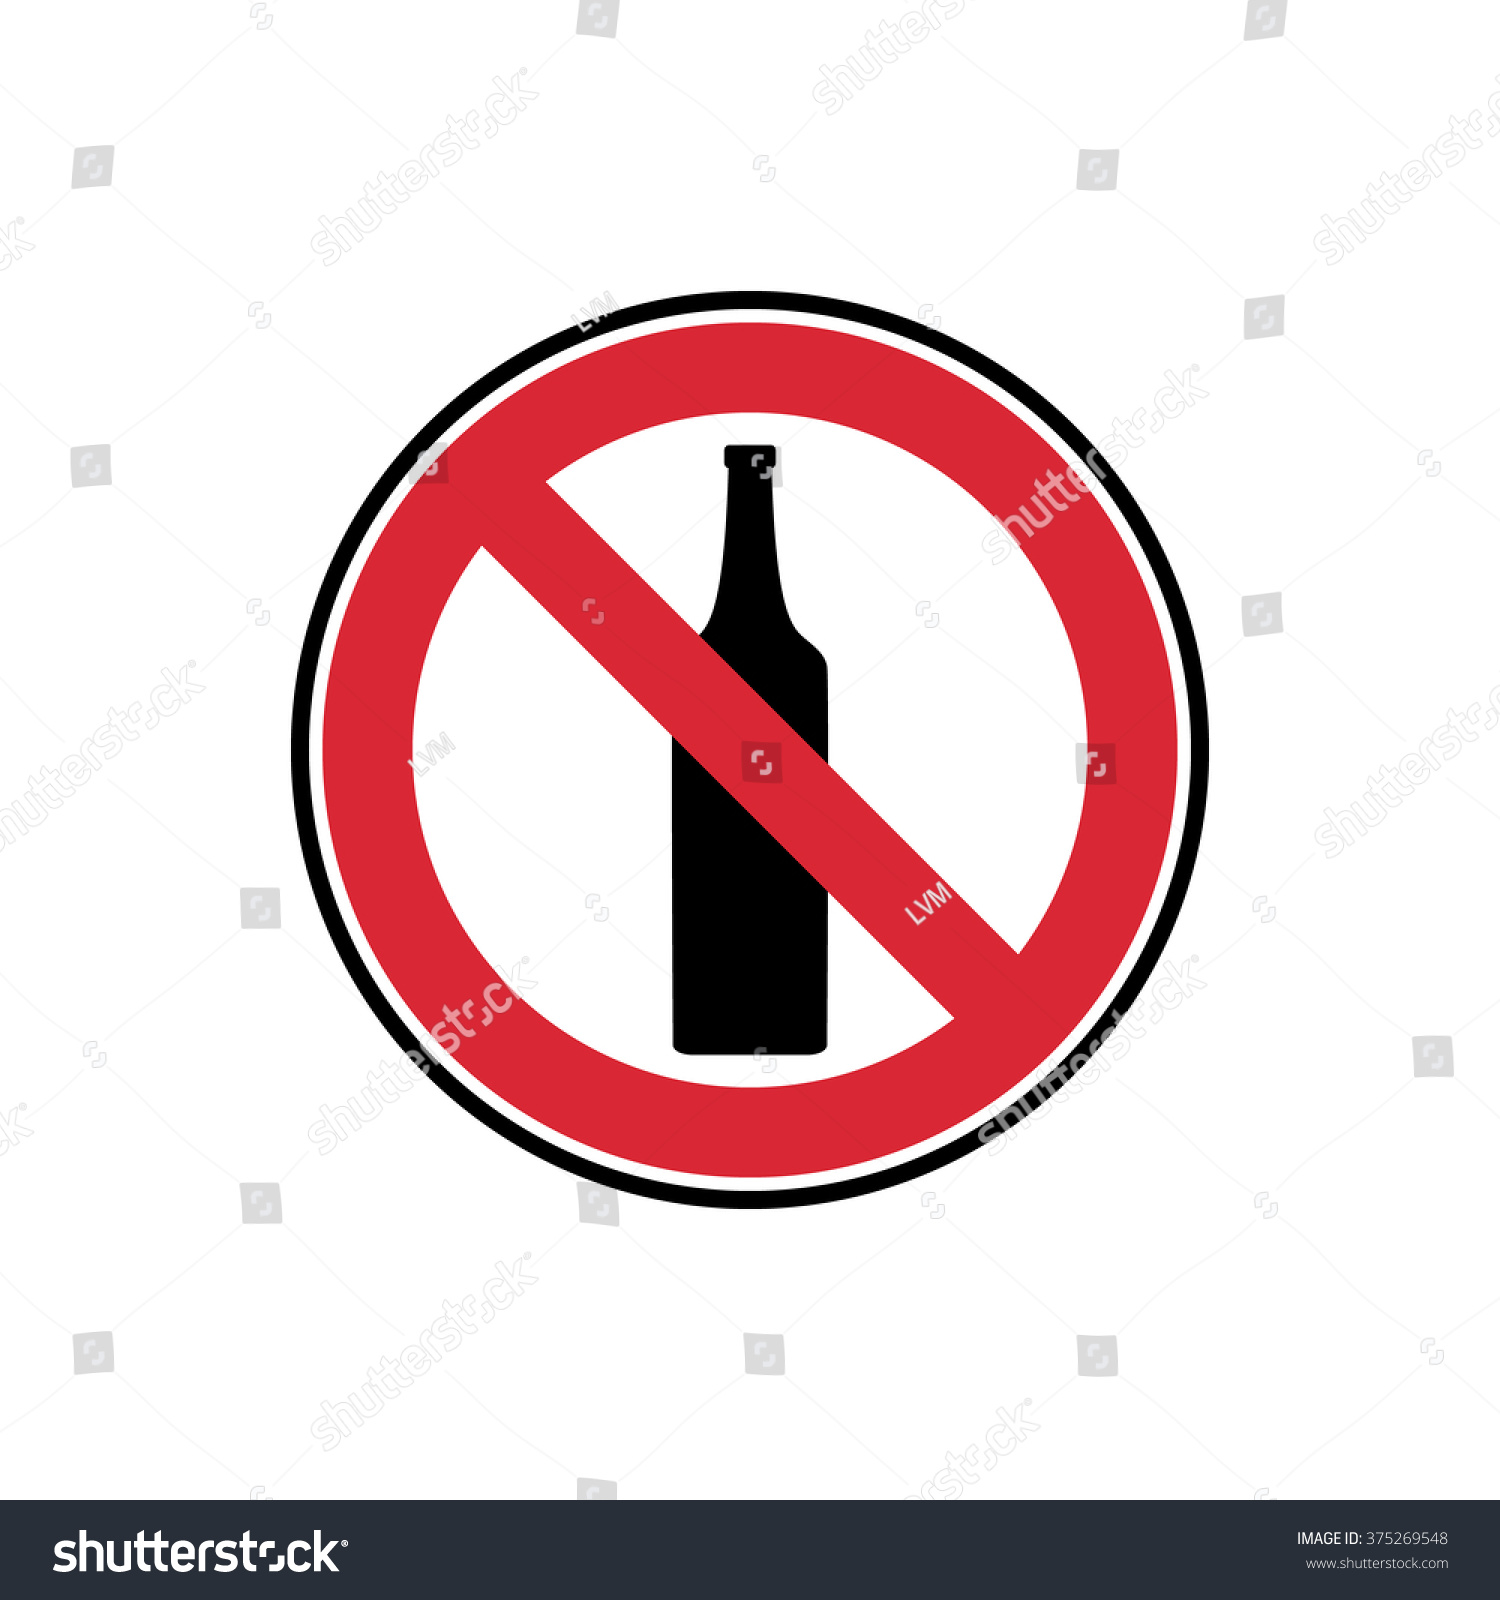 SVG of vector red and black prohibited symbol do not drink isolated on white background svg